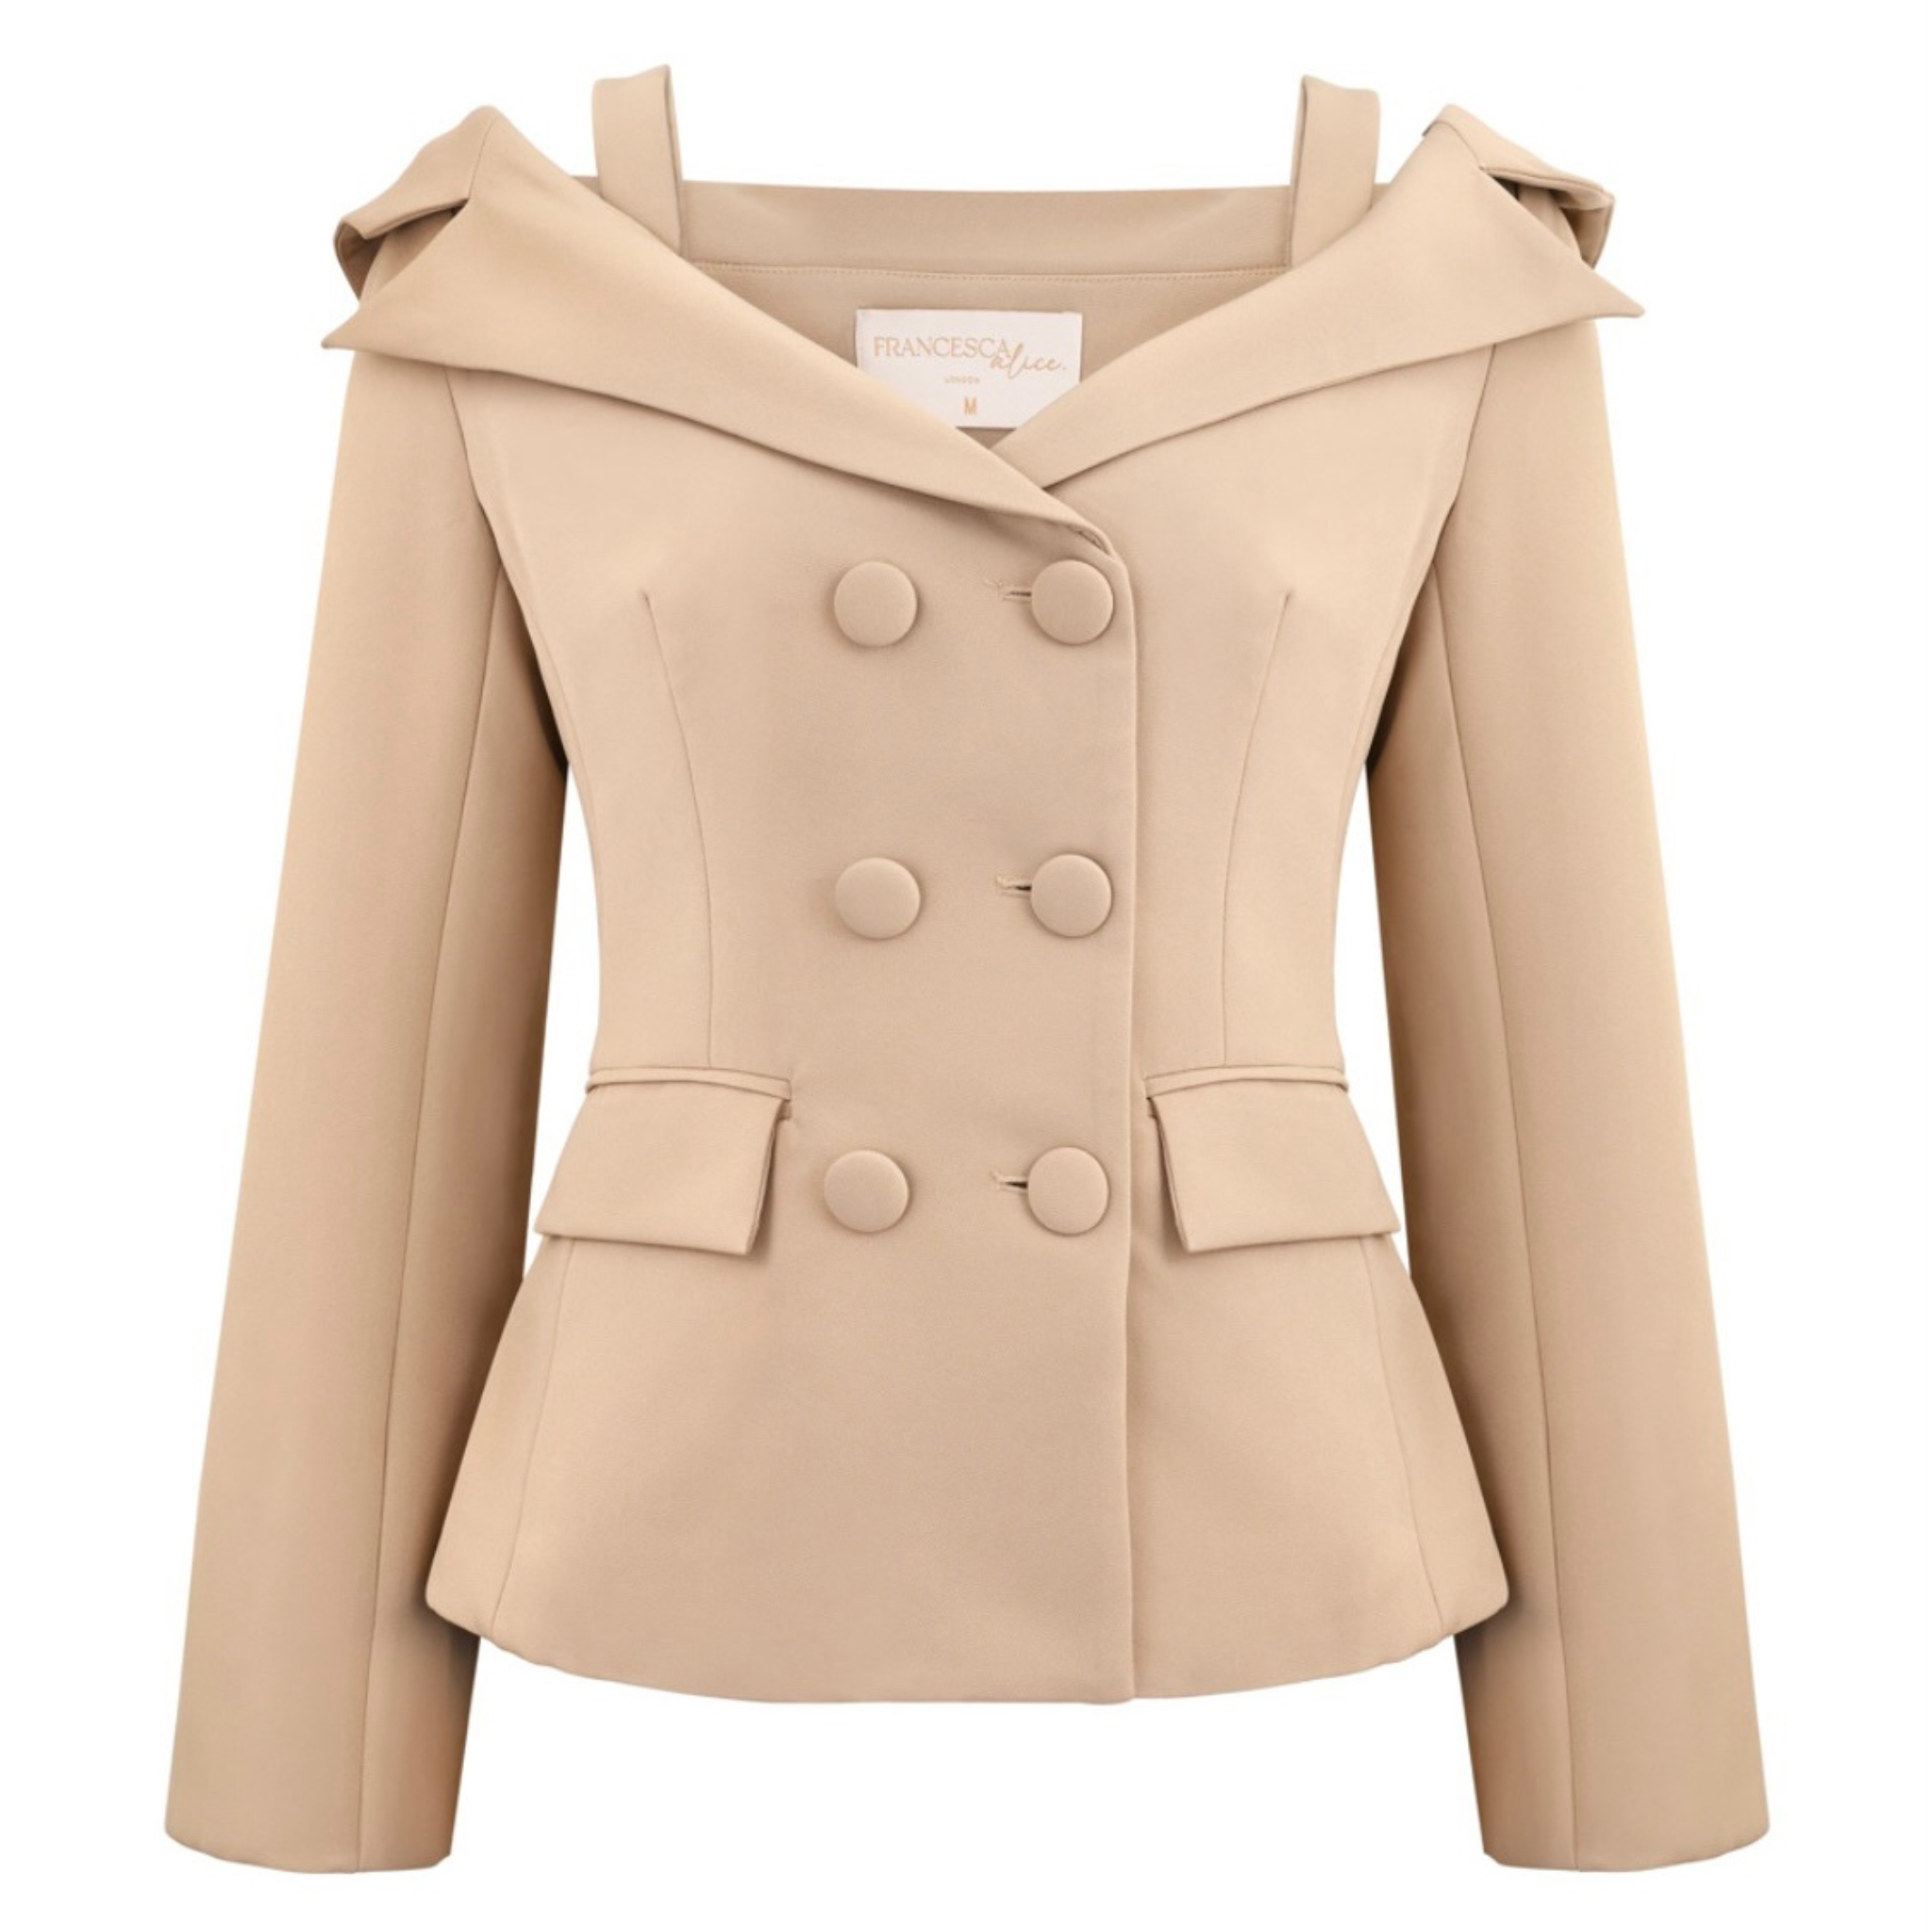 Camel off-the-shoulder double-breasted blazer for women. This stylish blazer features a button fastening and an off-the-shoulder design, adding a contemporary twist to a classic wardrobe staple. Perfect for a chic and sophisticated look